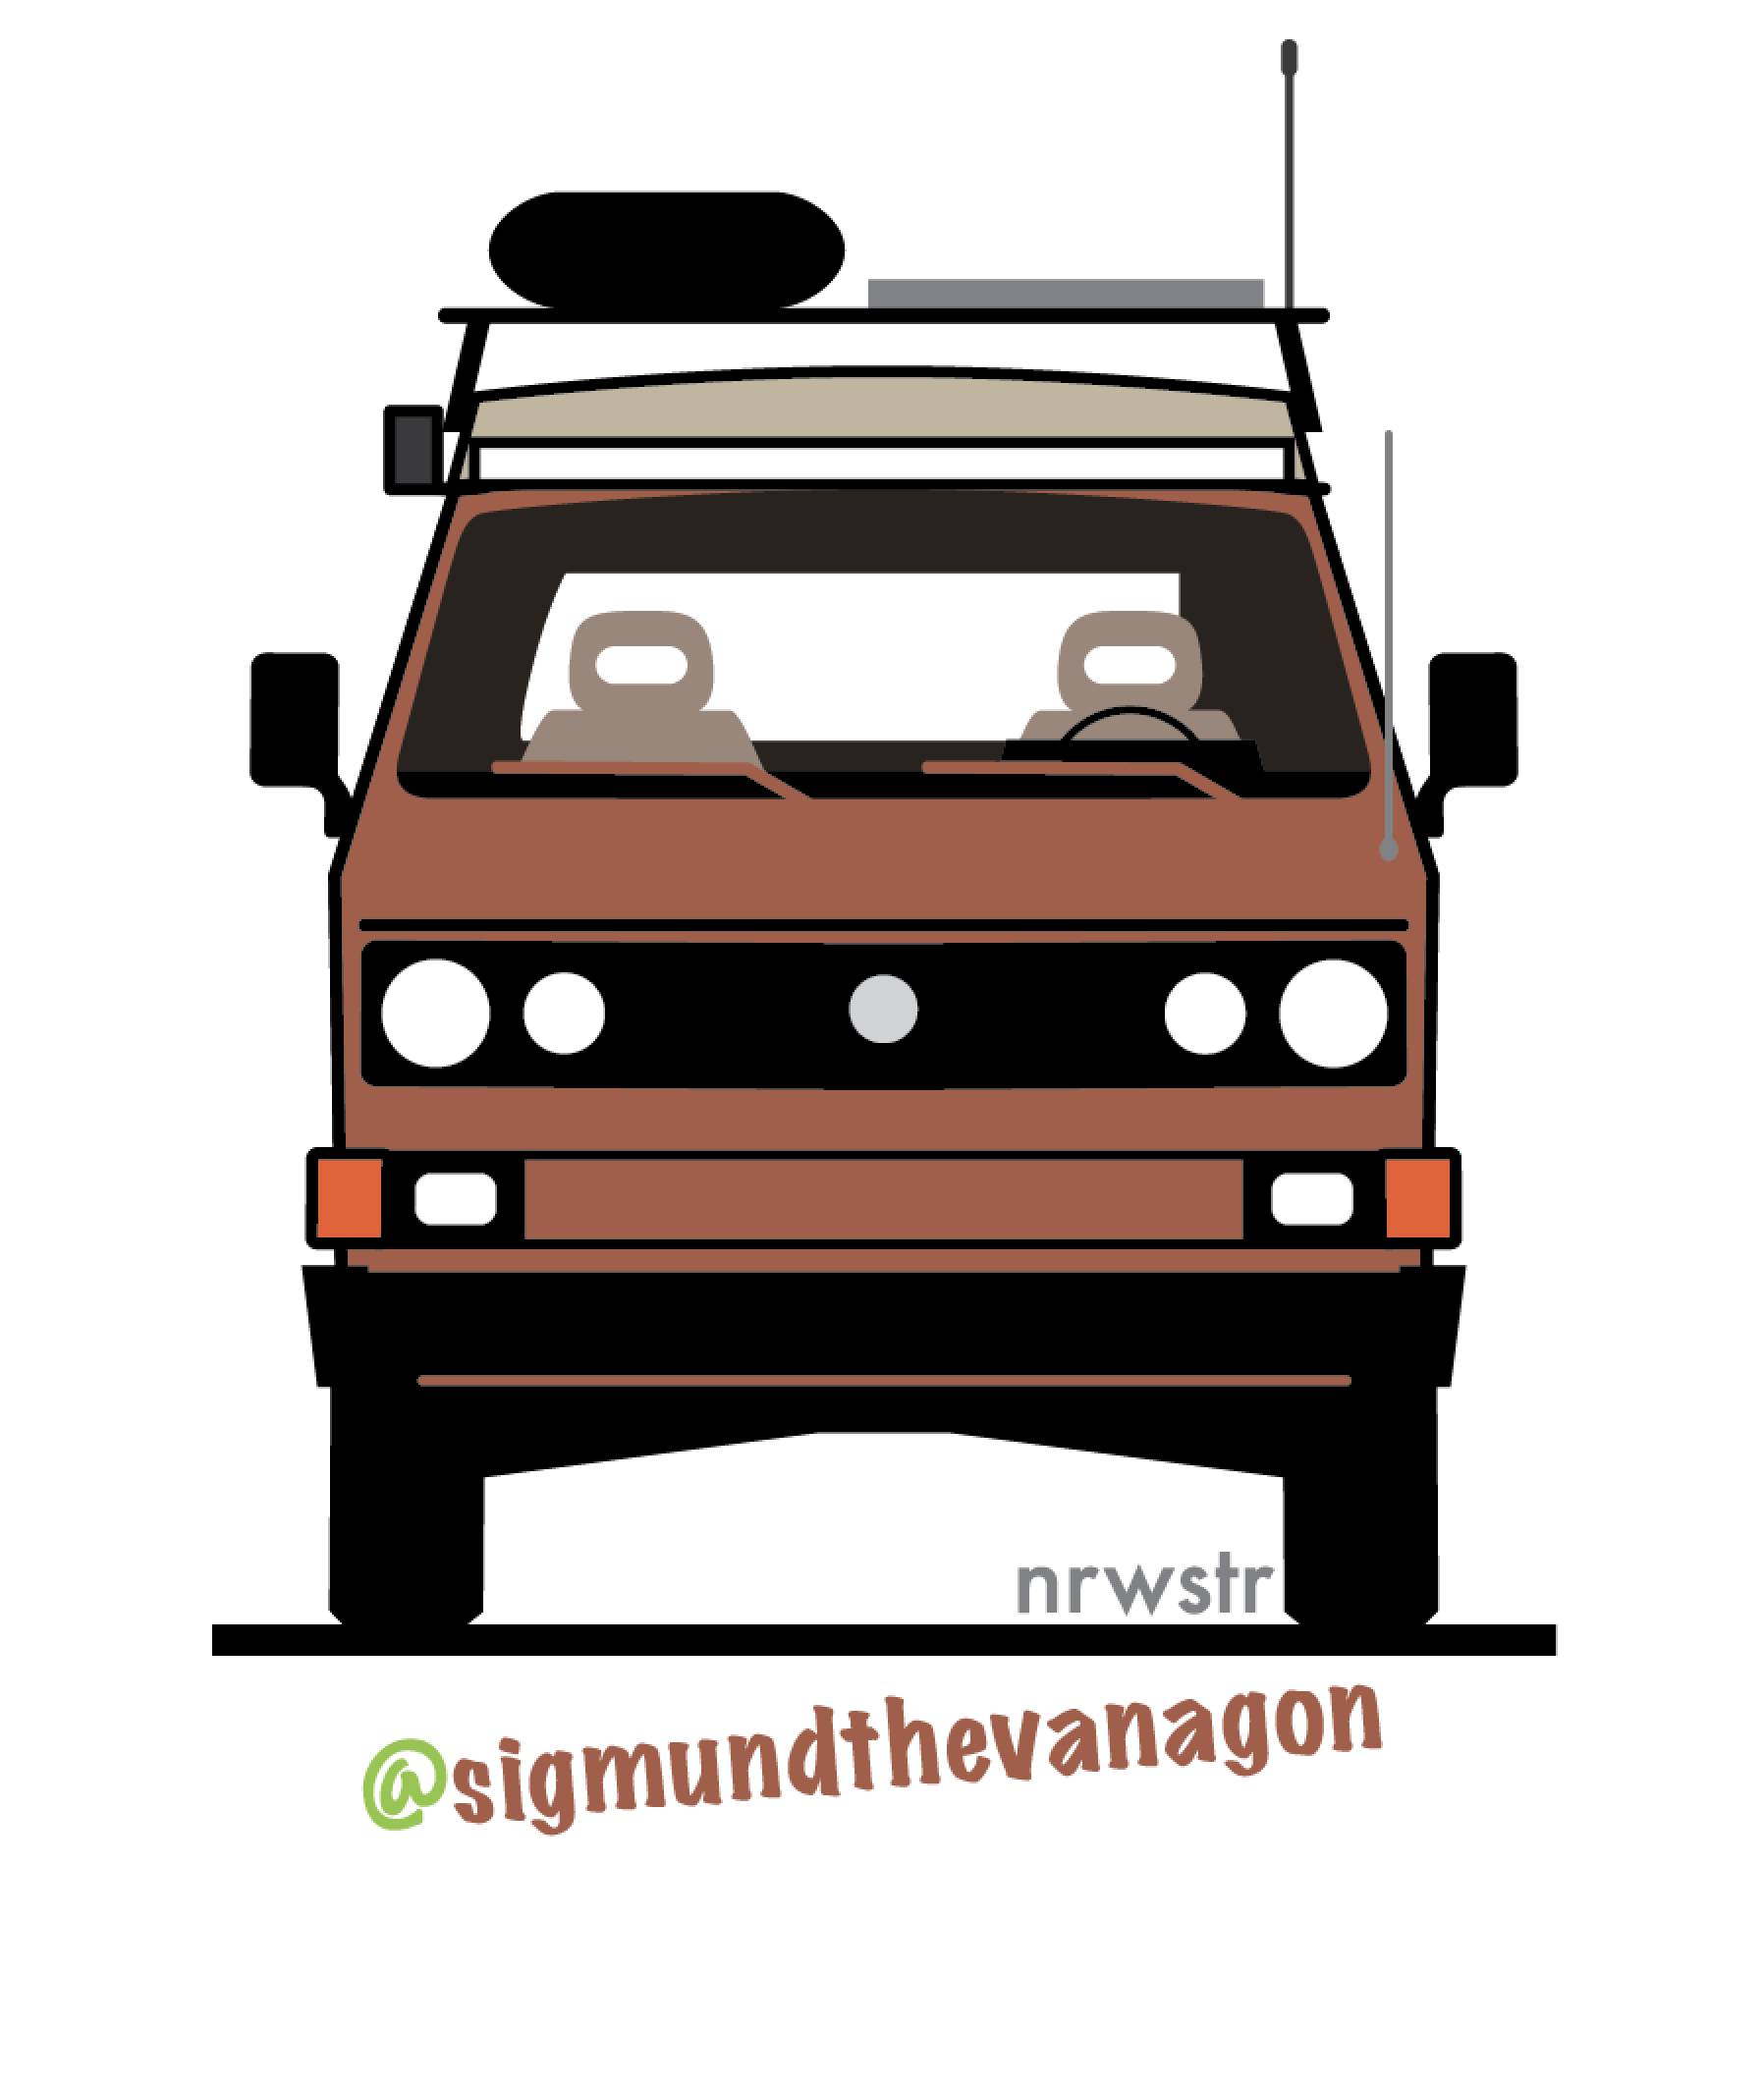 sigmundthevanagon front view.png